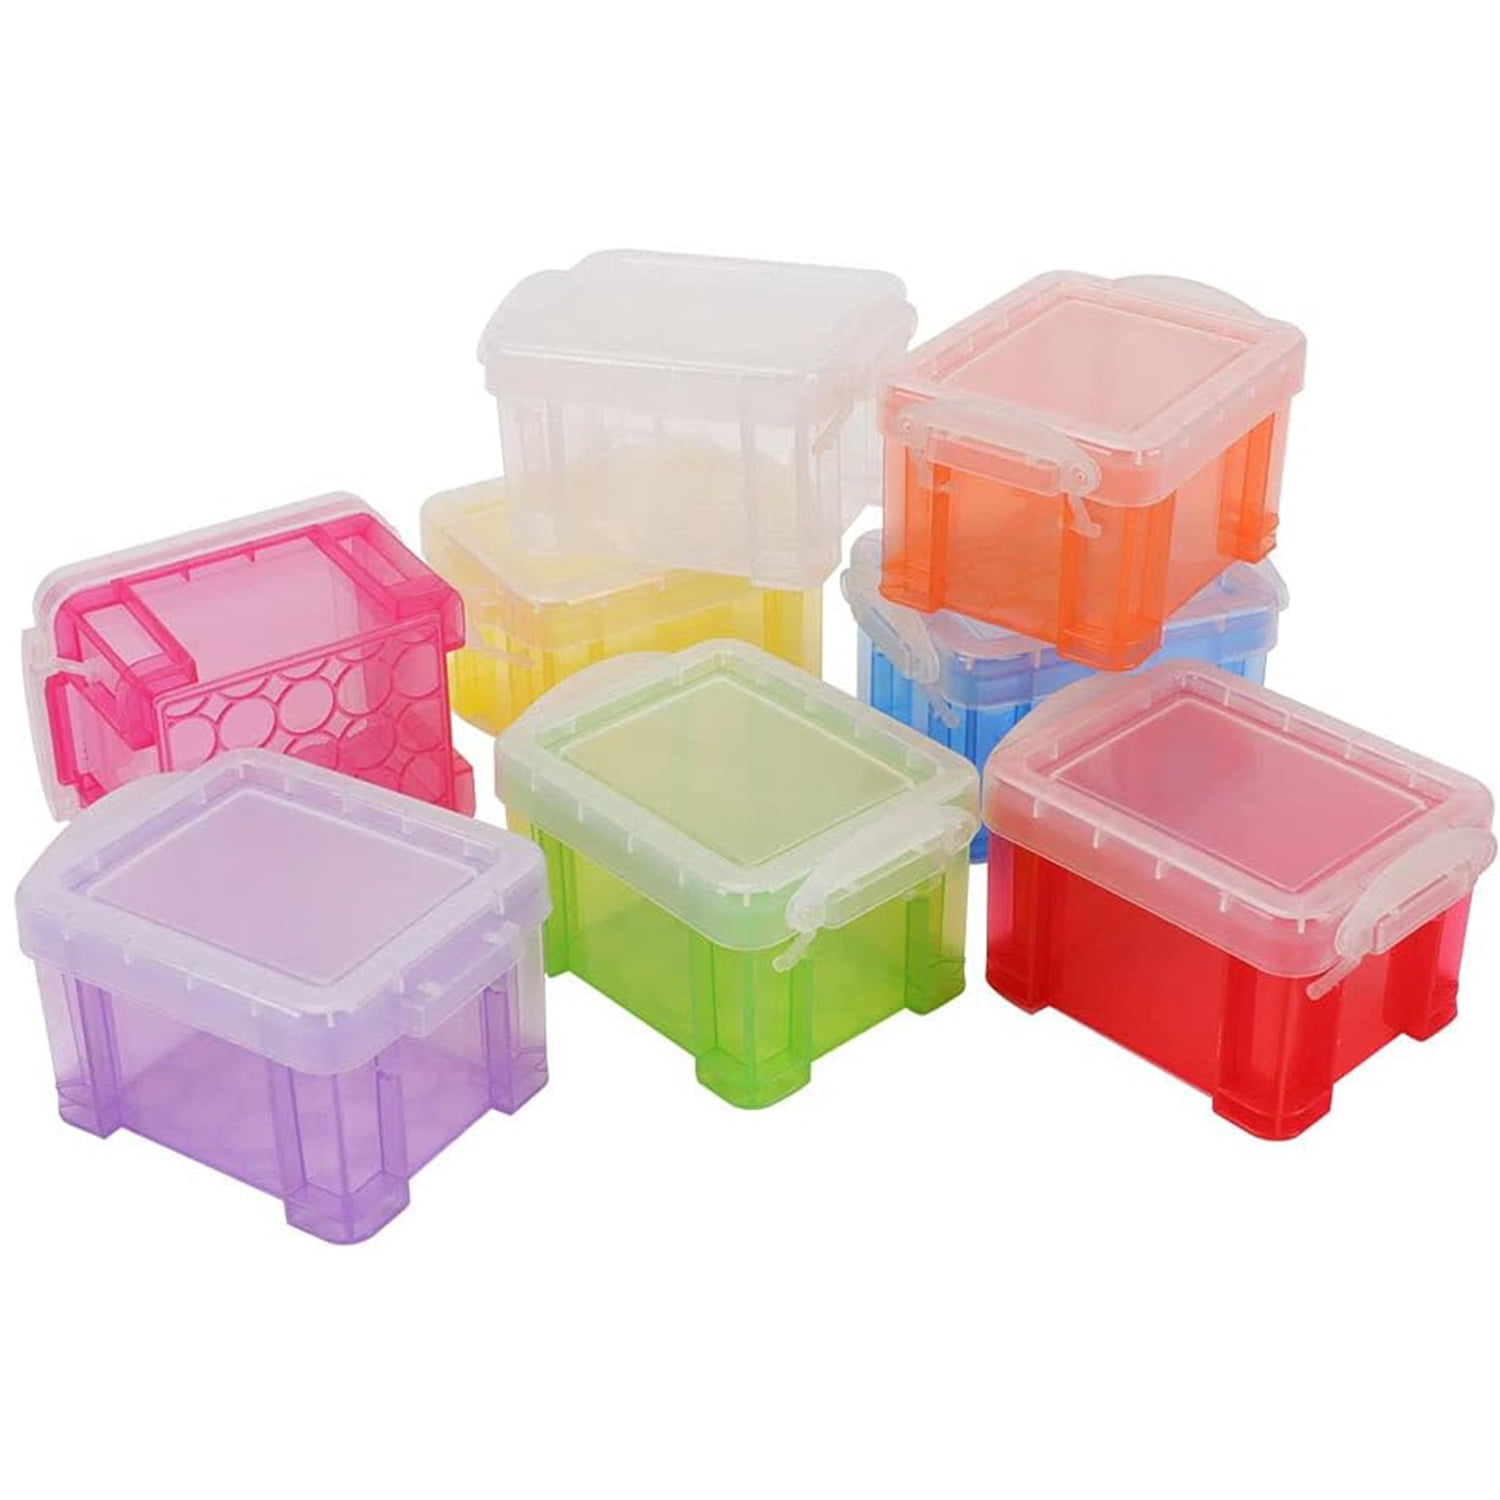 Lot of 25 Container Store Mini Boxes With Lid For Storage, Candy & Crafts